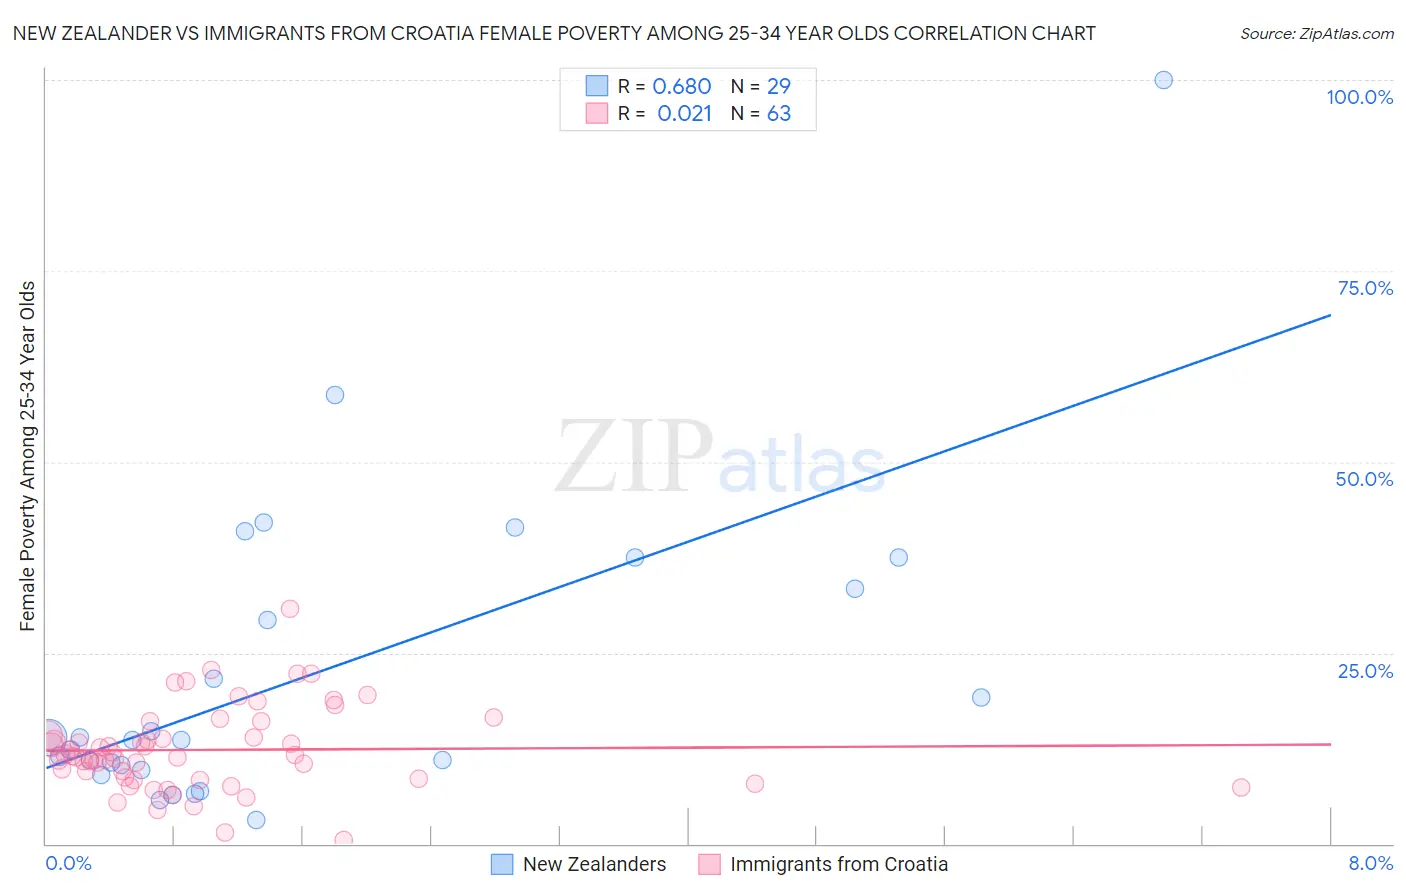 New Zealander vs Immigrants from Croatia Female Poverty Among 25-34 Year Olds